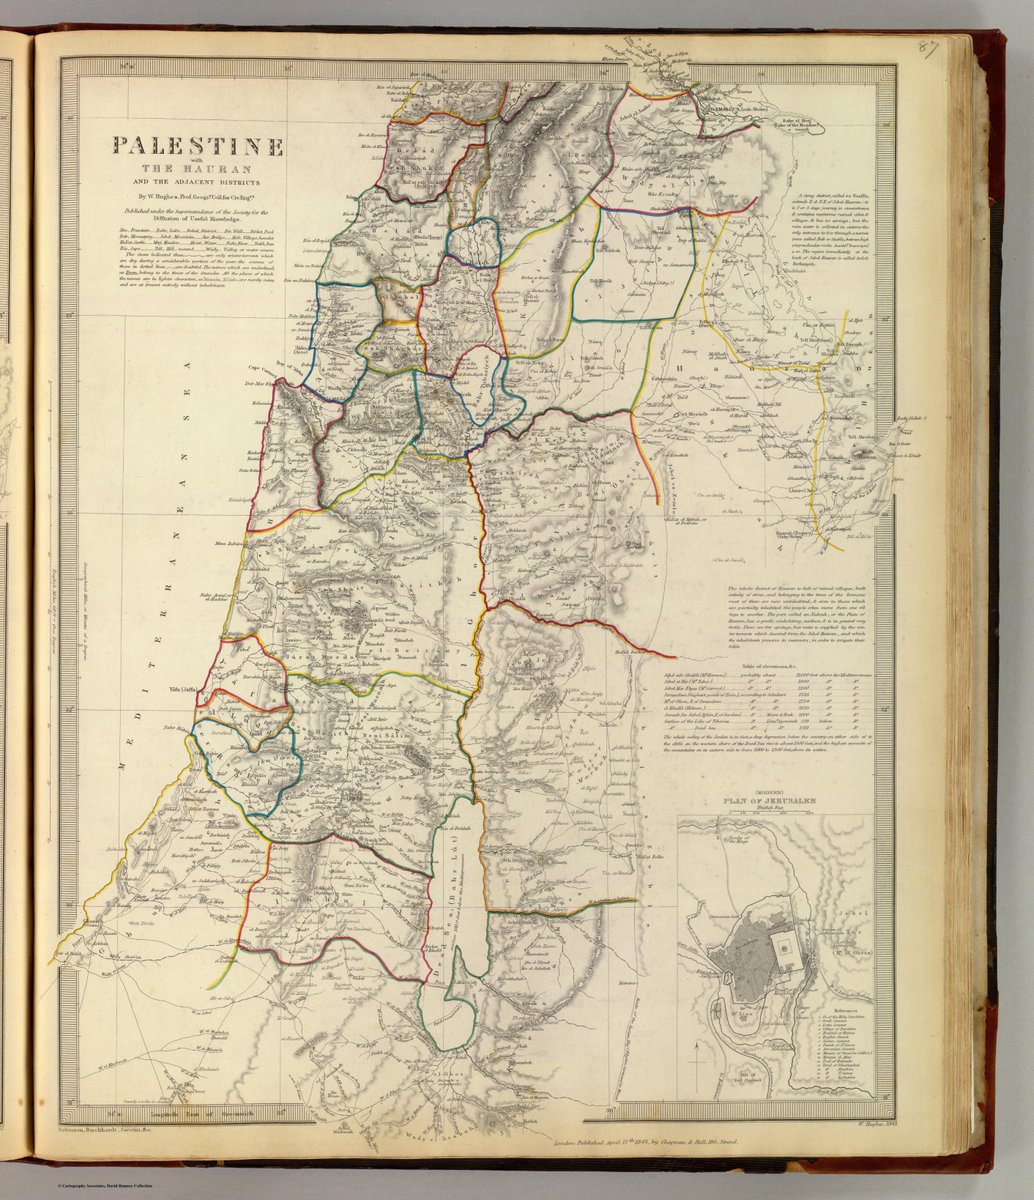 @HamasAtrocities Here is a map of Palestine before it was invaded by snomed.